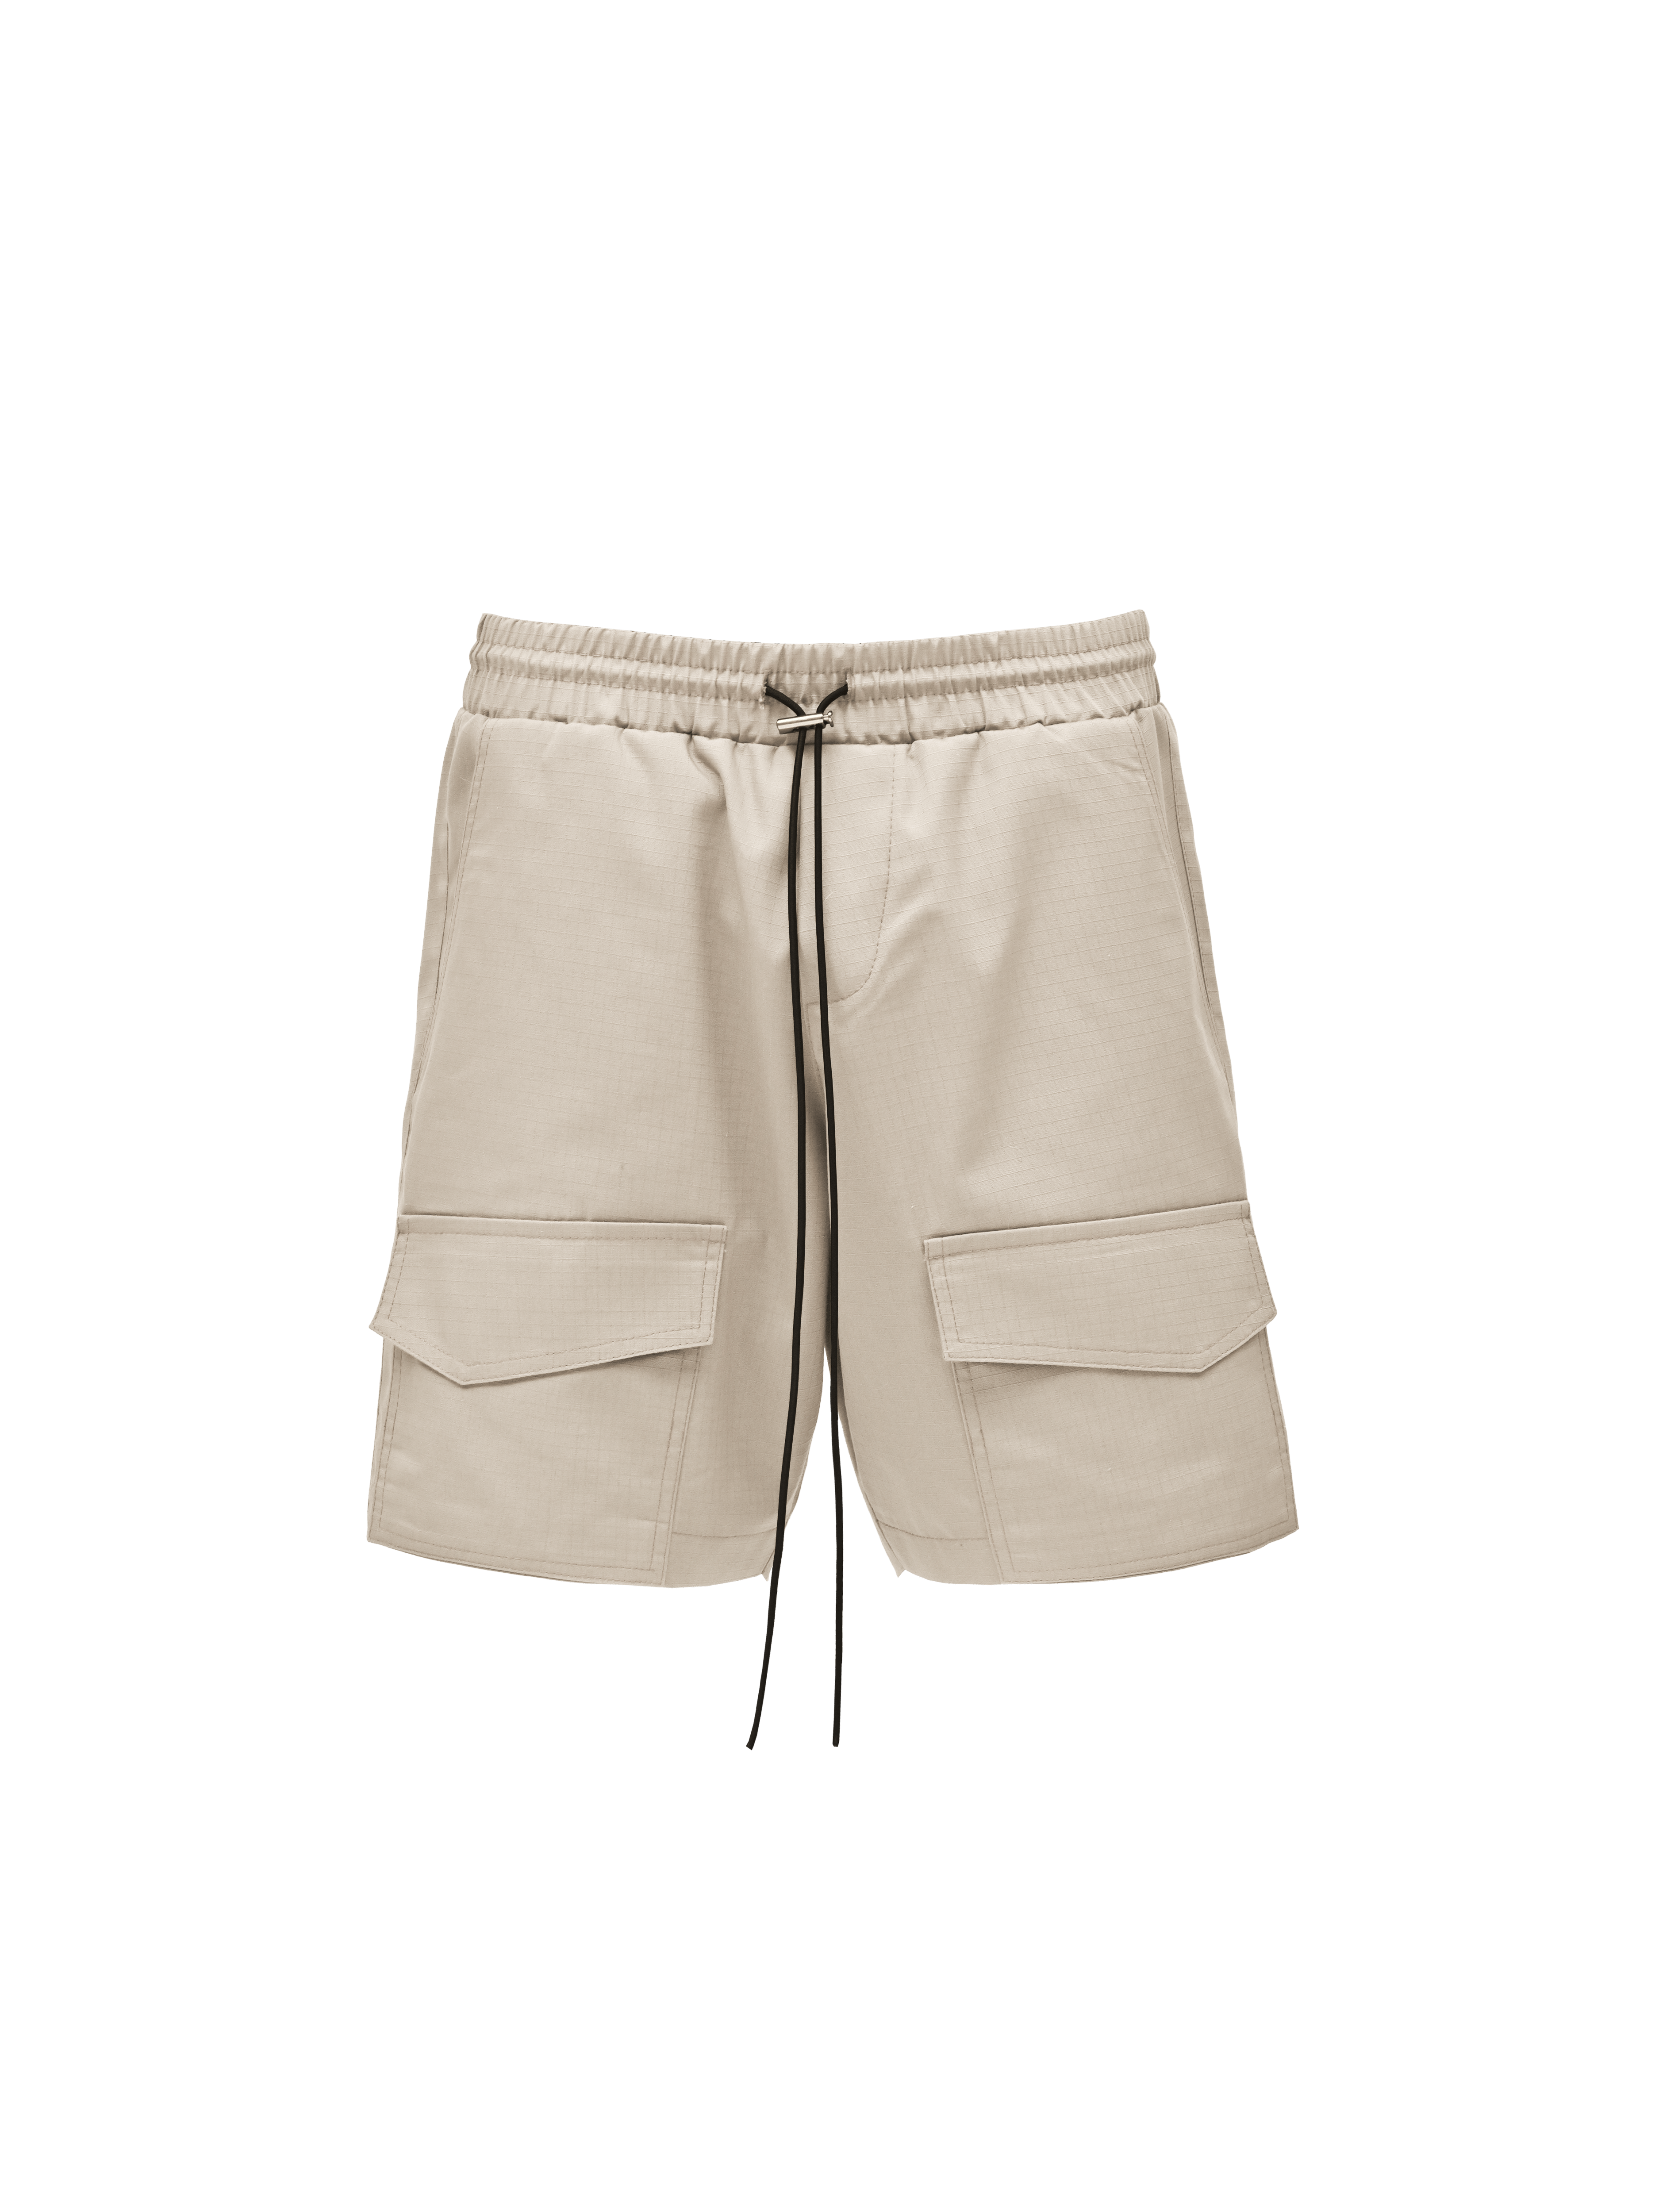 Front Pocket Shorts - Taupe